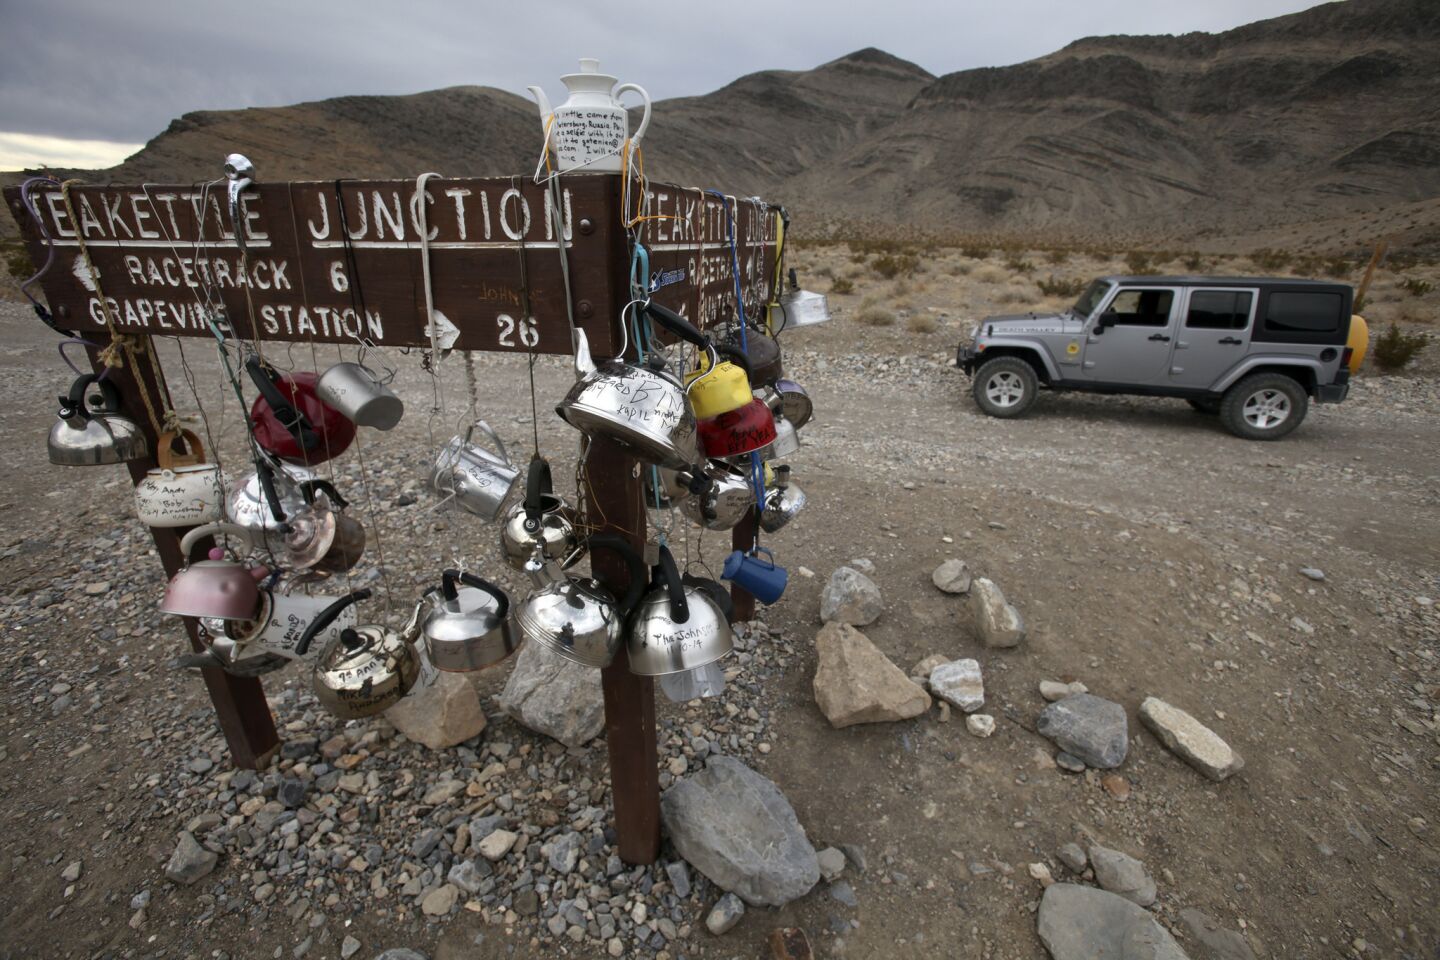 Teakettle Junction is a wide spot on Racetrack road and located six miles from the Racetrack. Travelers on the rough road hang teakettles on signage, creating a sort of open-air art installation.